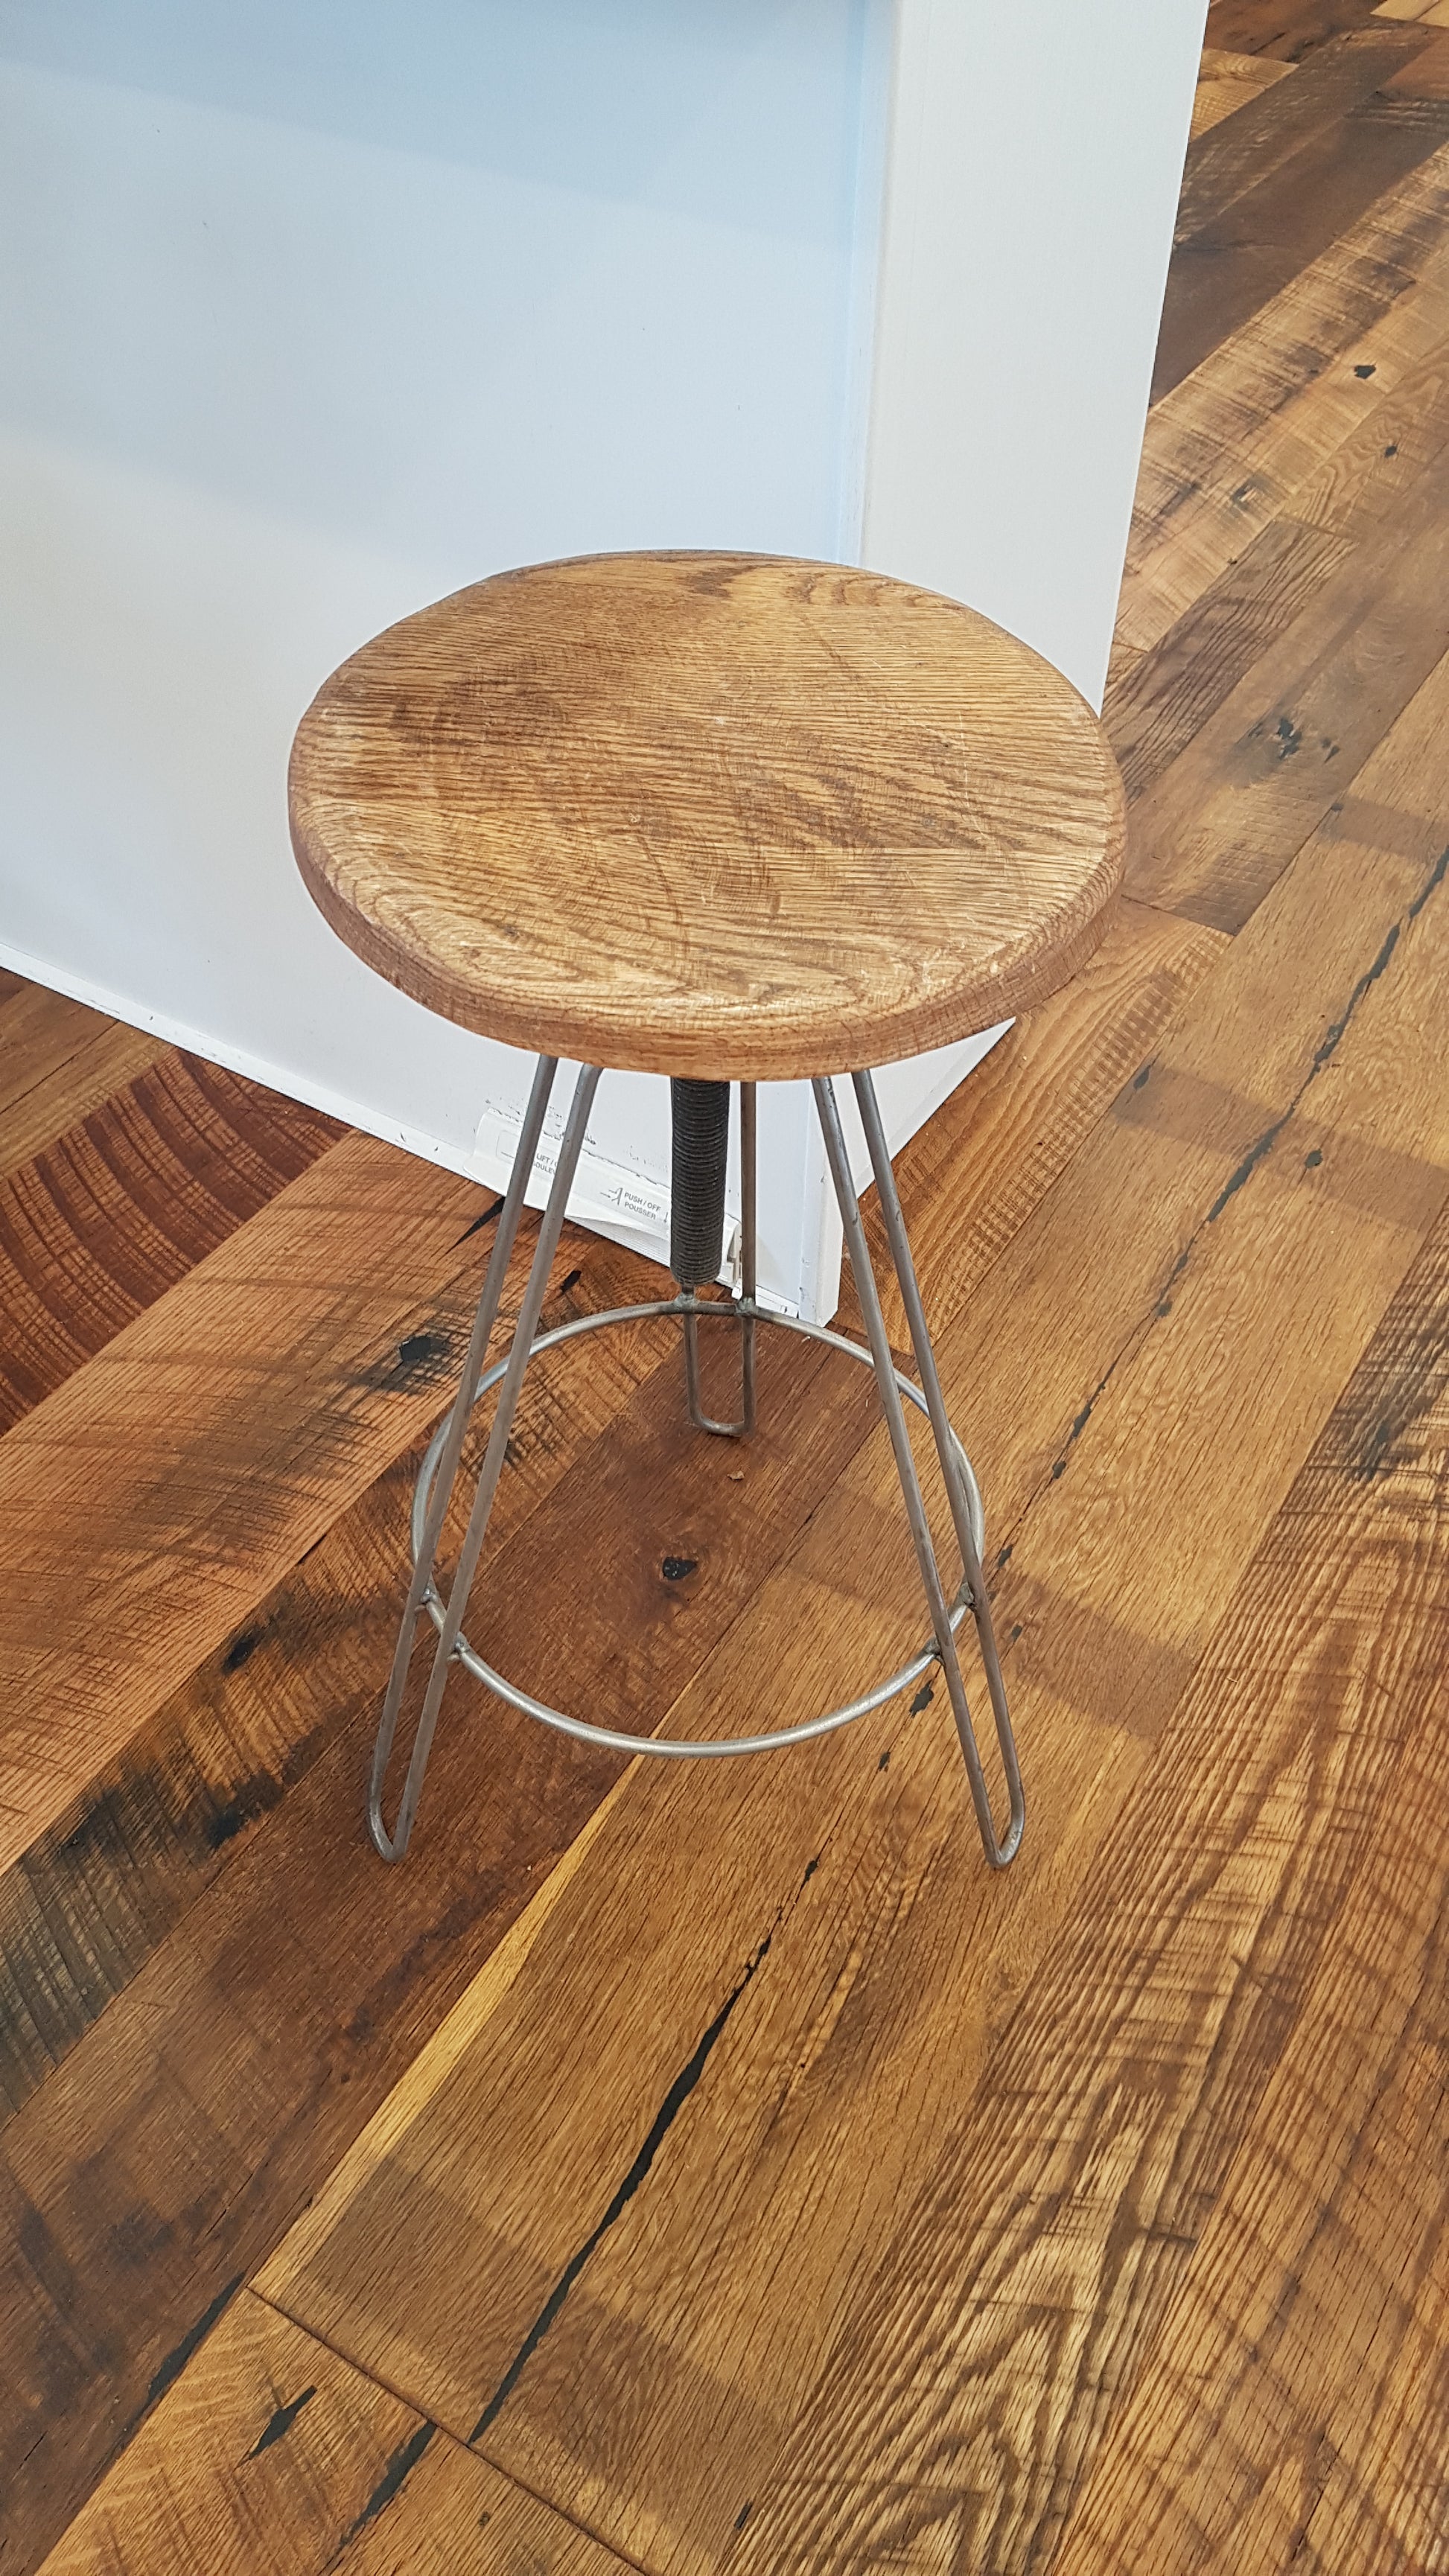 The 'Hairpin Leg' Stool - Adjustable Height Swivel Stool with Top - Spearhead Collection - Stools - Hairpin Legs, Hardware, Seating, Steel